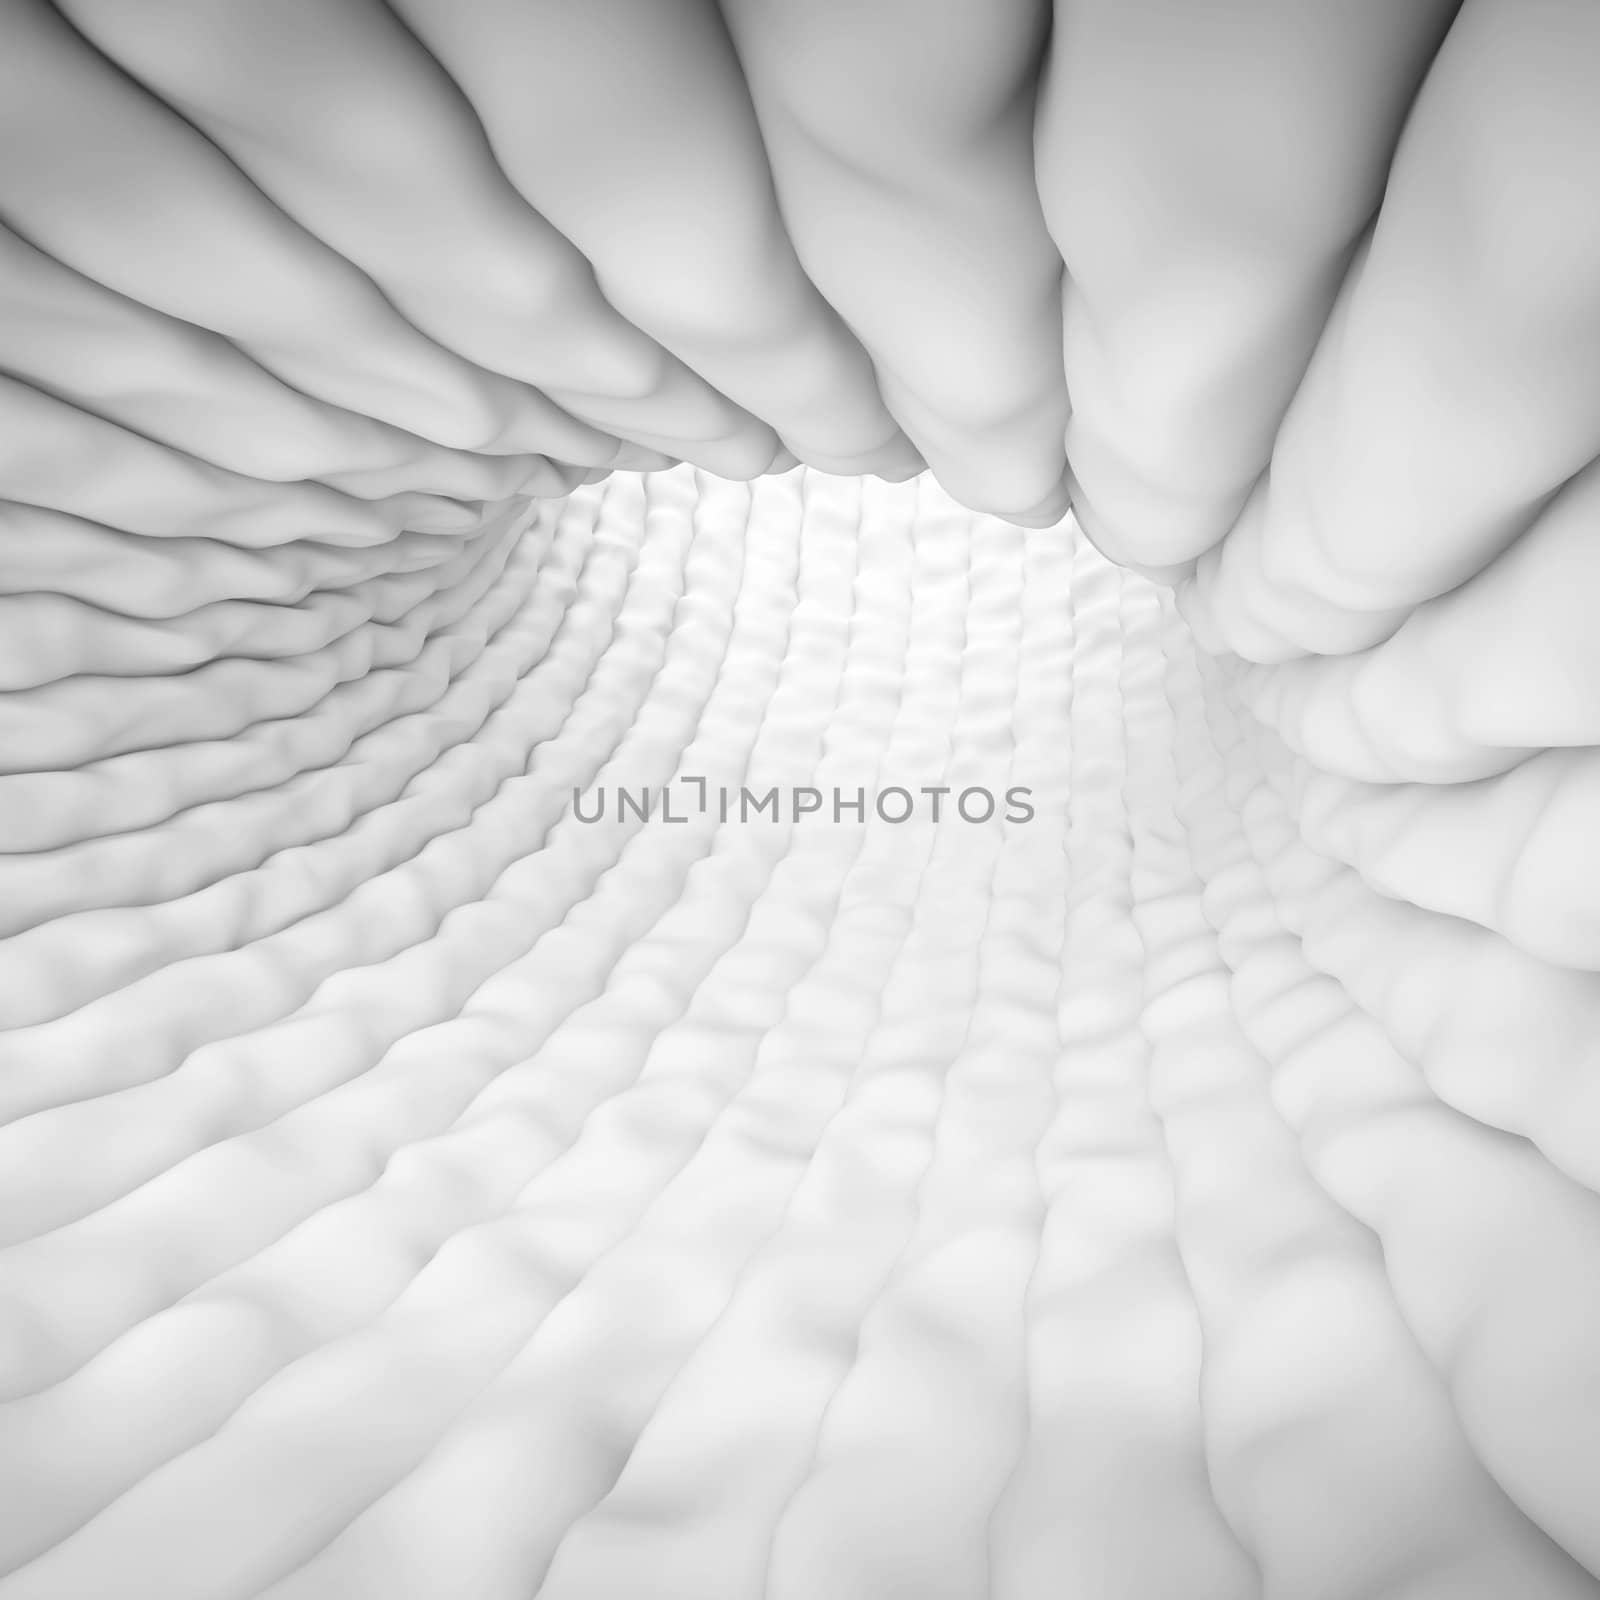 3d Illustration of White Abstract Tunnel